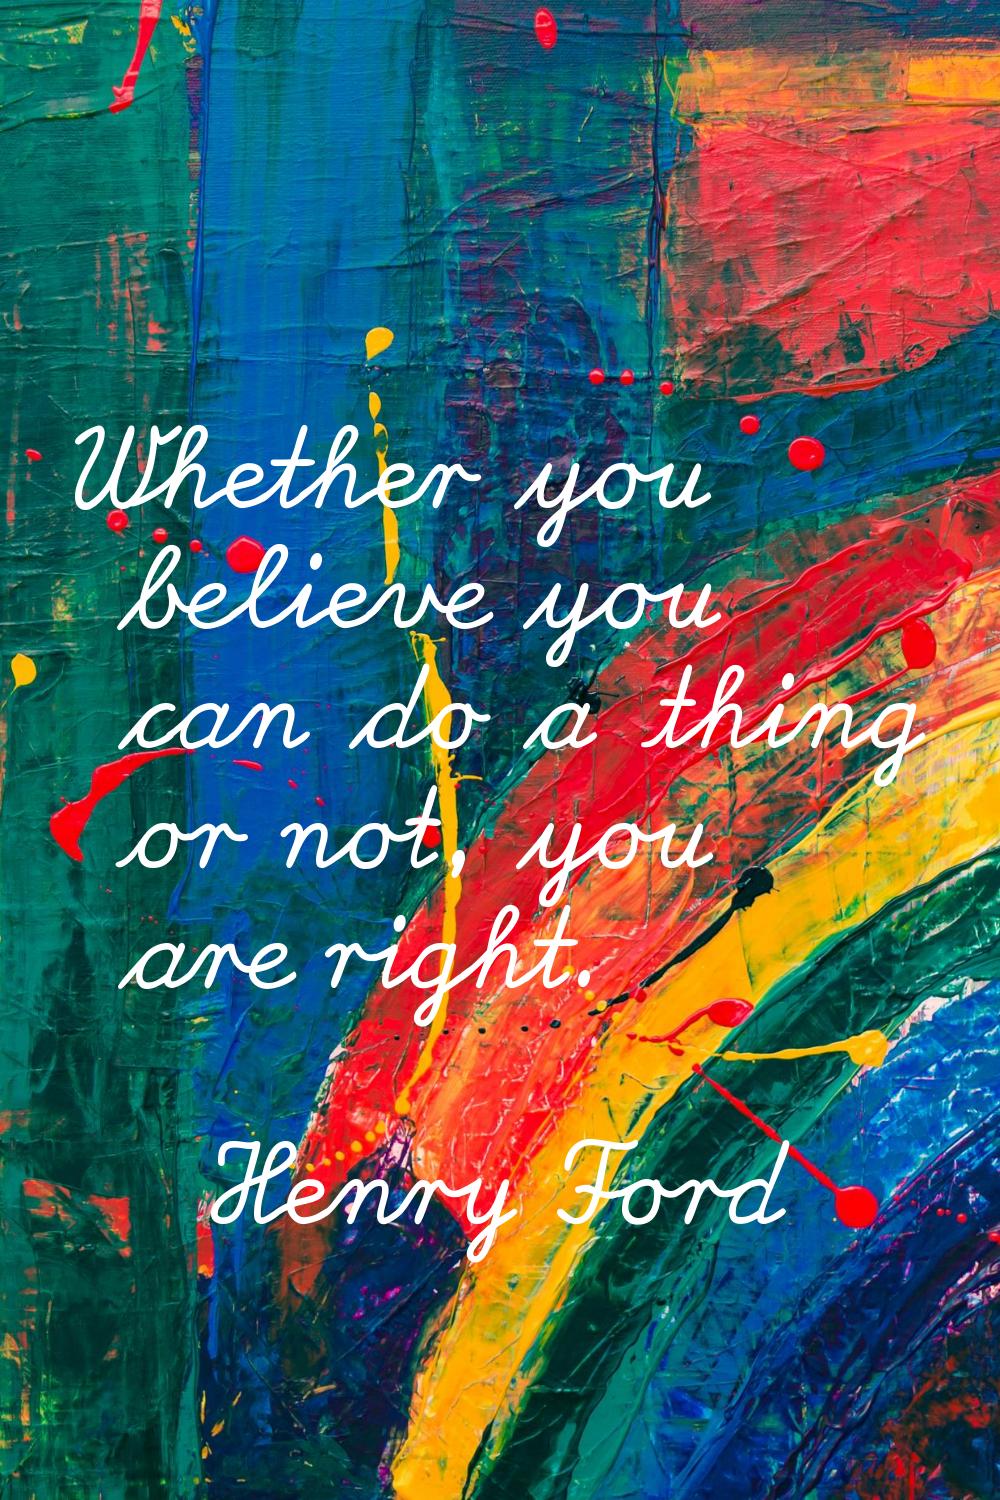 Whether you believe you can do a thing or not, you are right.